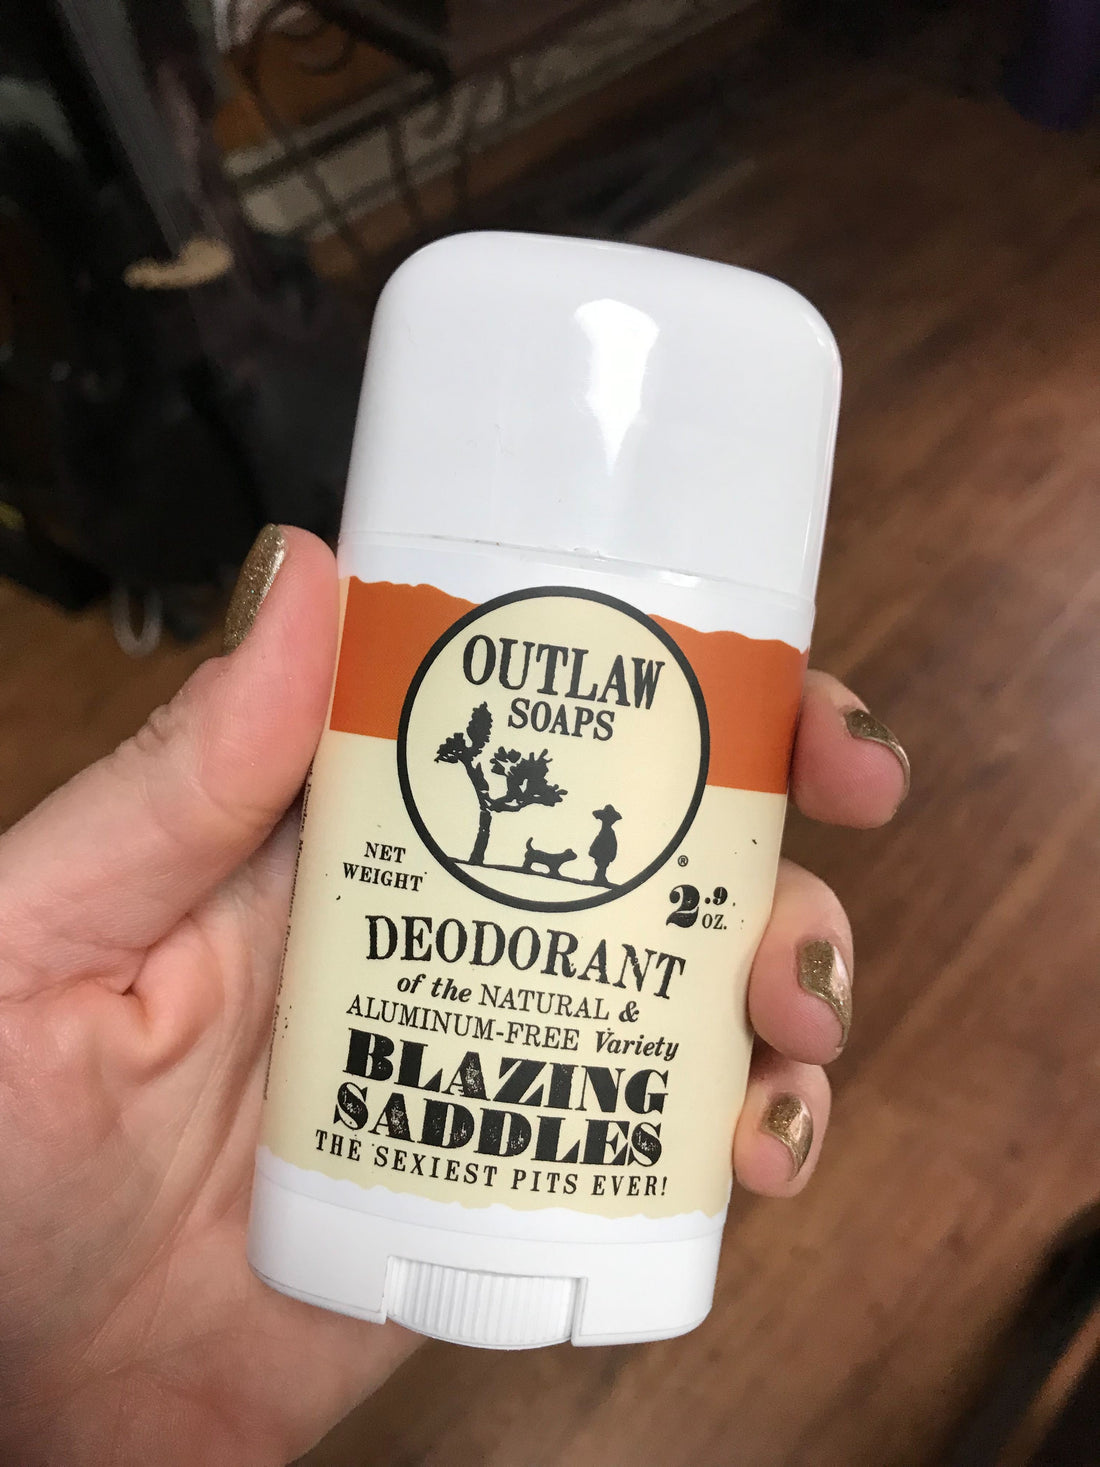 The Deodorant Has Landed! I REPEAT: THE DEODORANT HAS LANDED